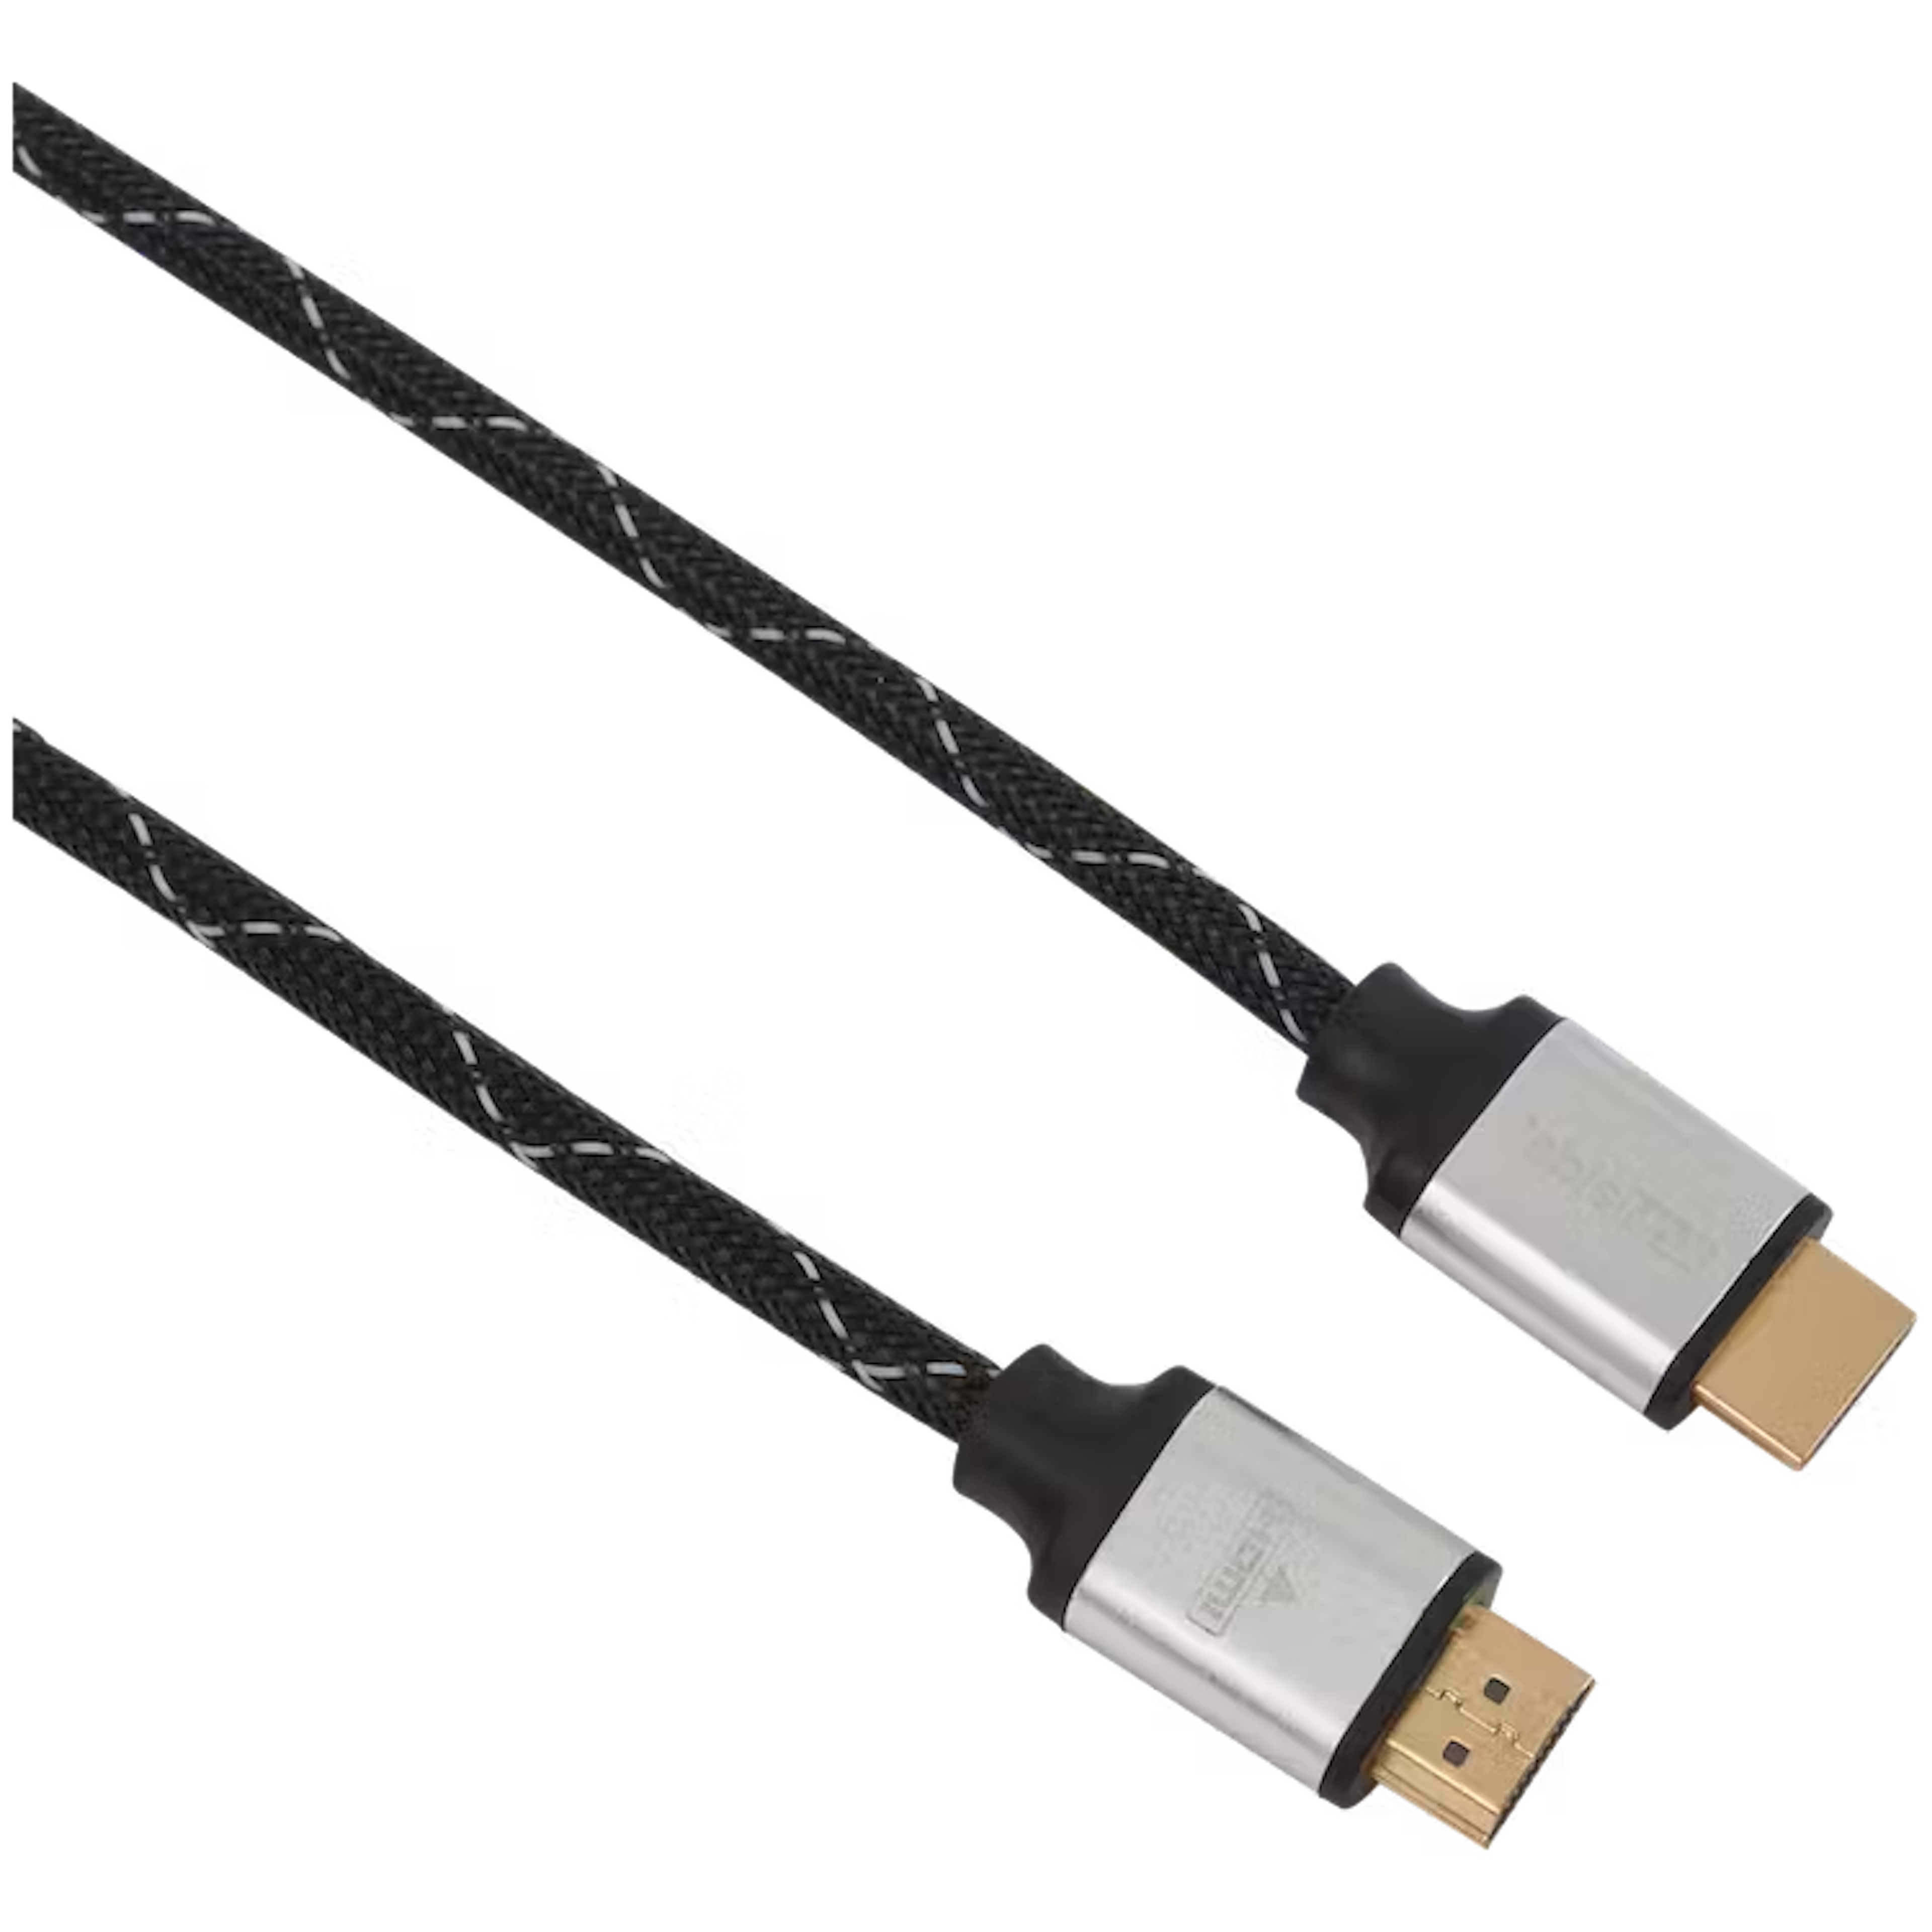 HDMI cable 3 meters